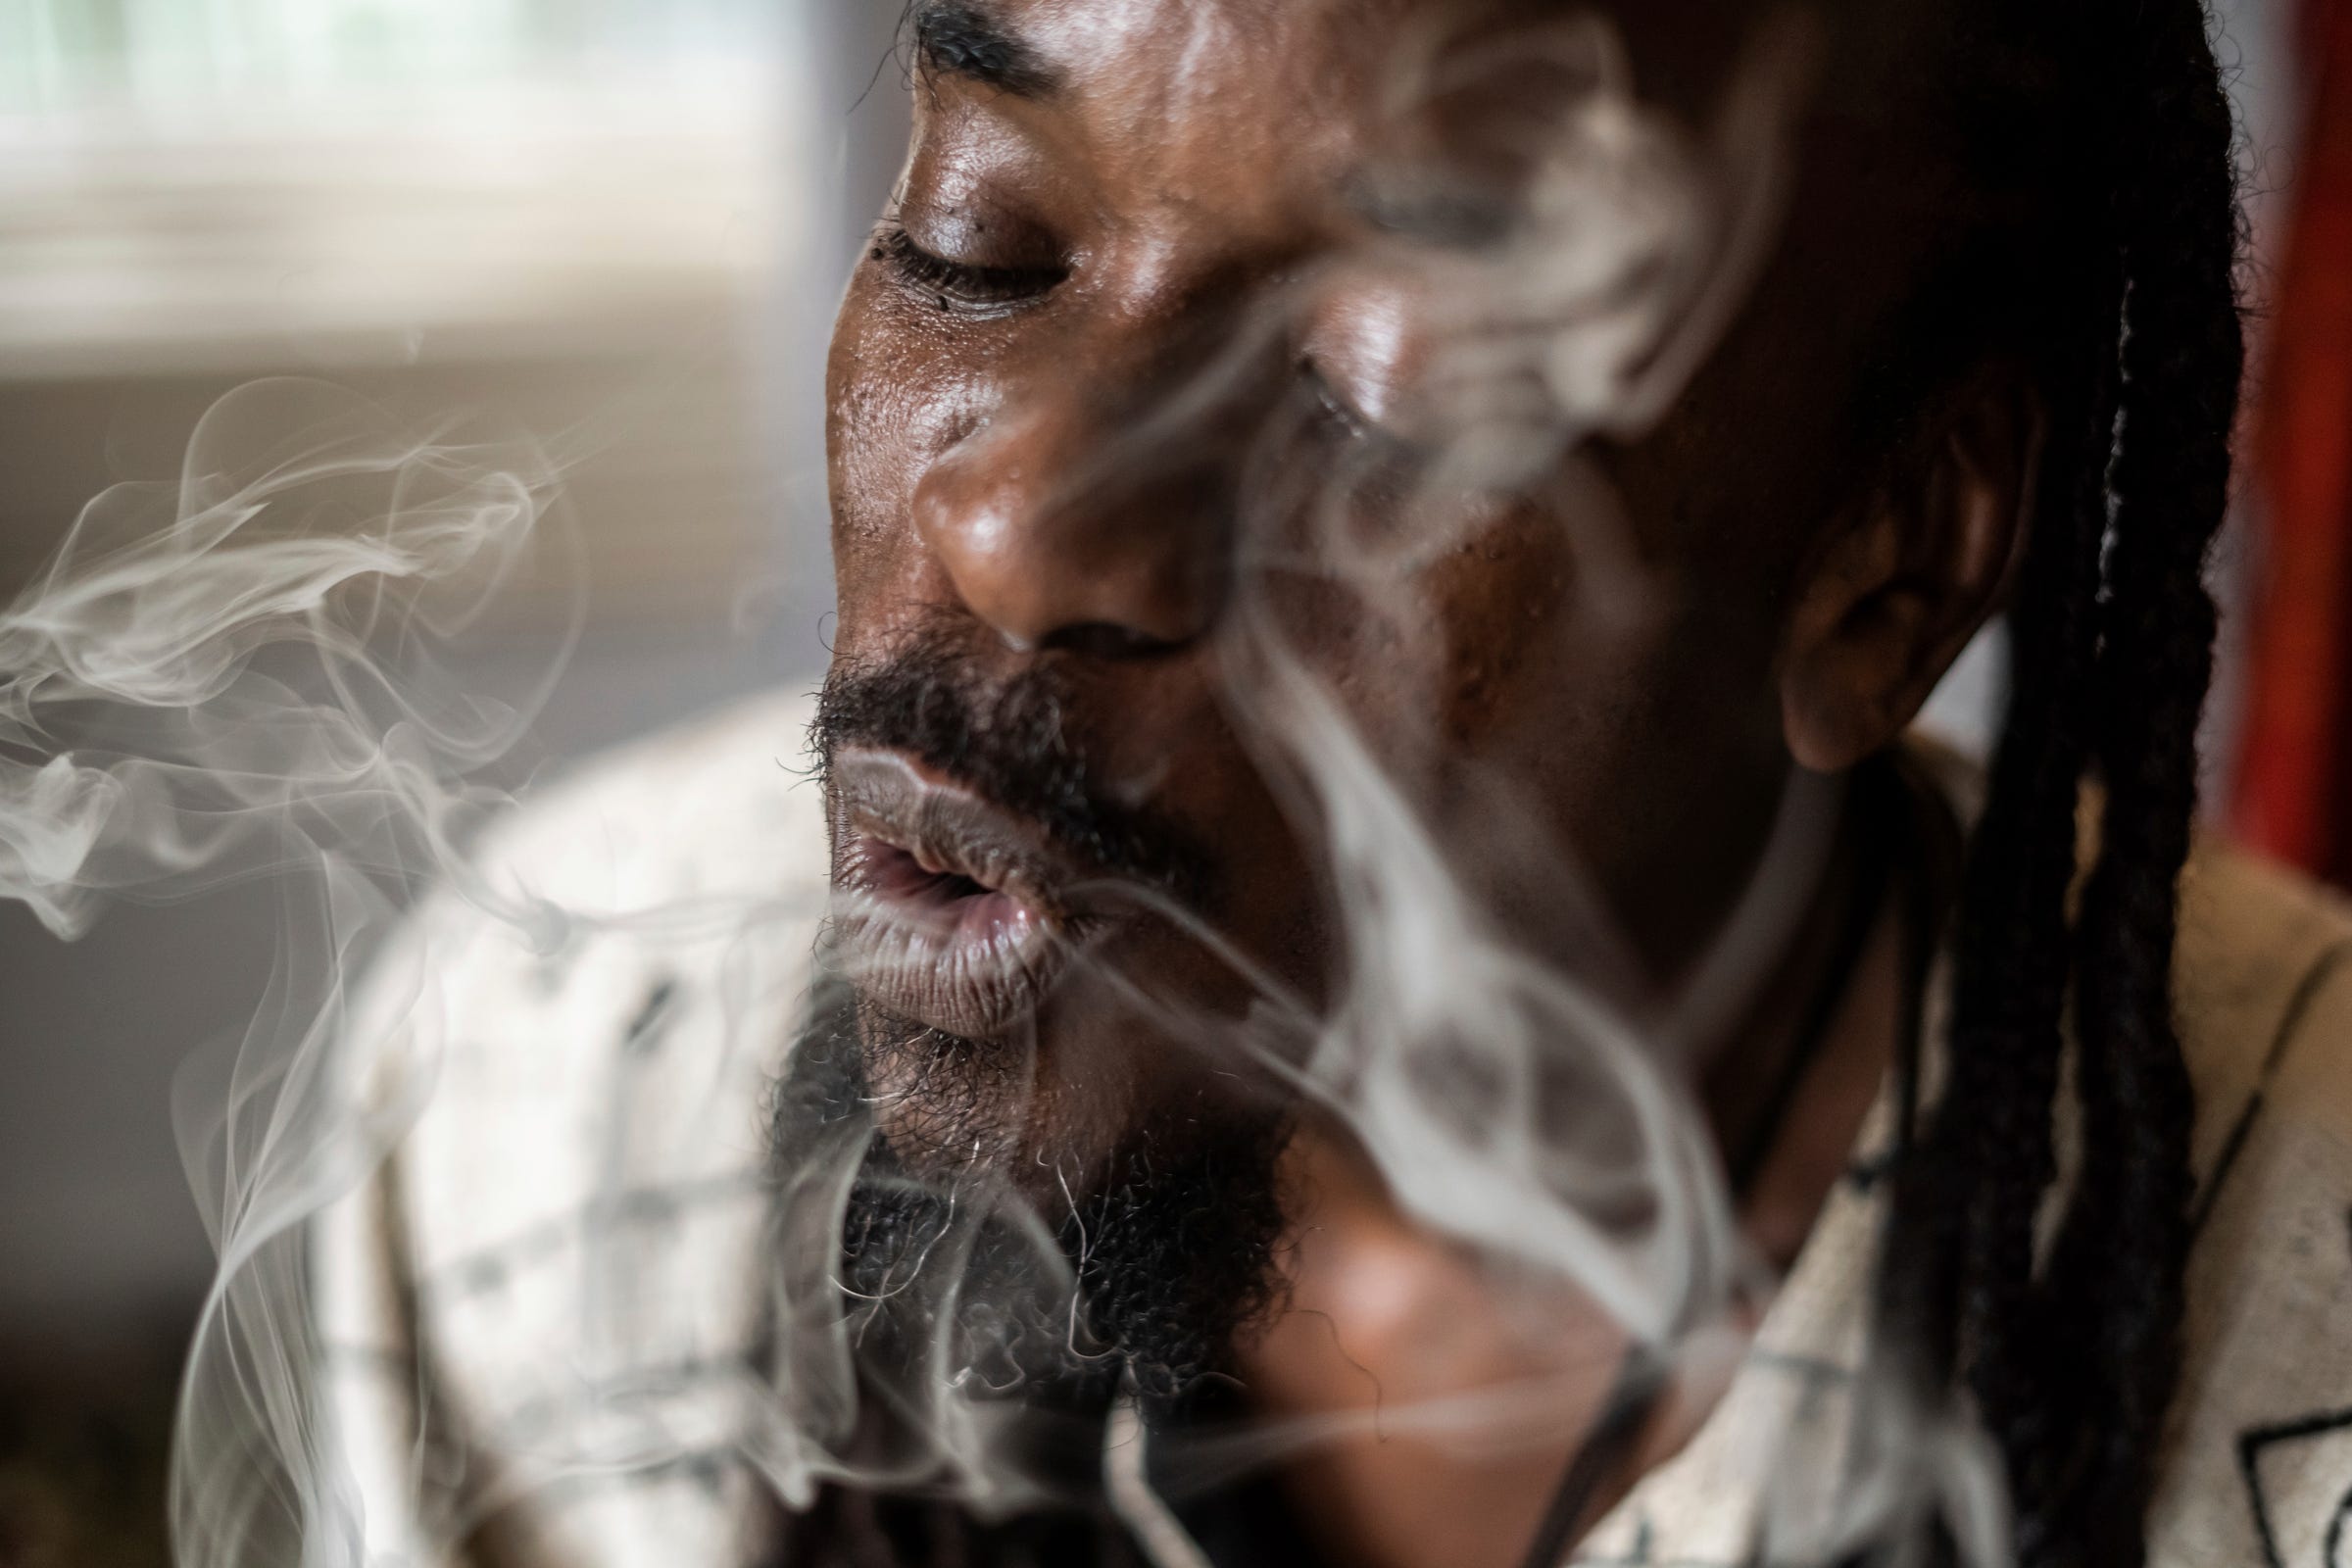 Psychonaut Academy of Detroit founder Sincere Seven, 43, blows smoke after taking a hit off a blunt at the Psychonaut Academy of Detroit, located in an old house on the city's west side, on Thursday, July 13, 2022.